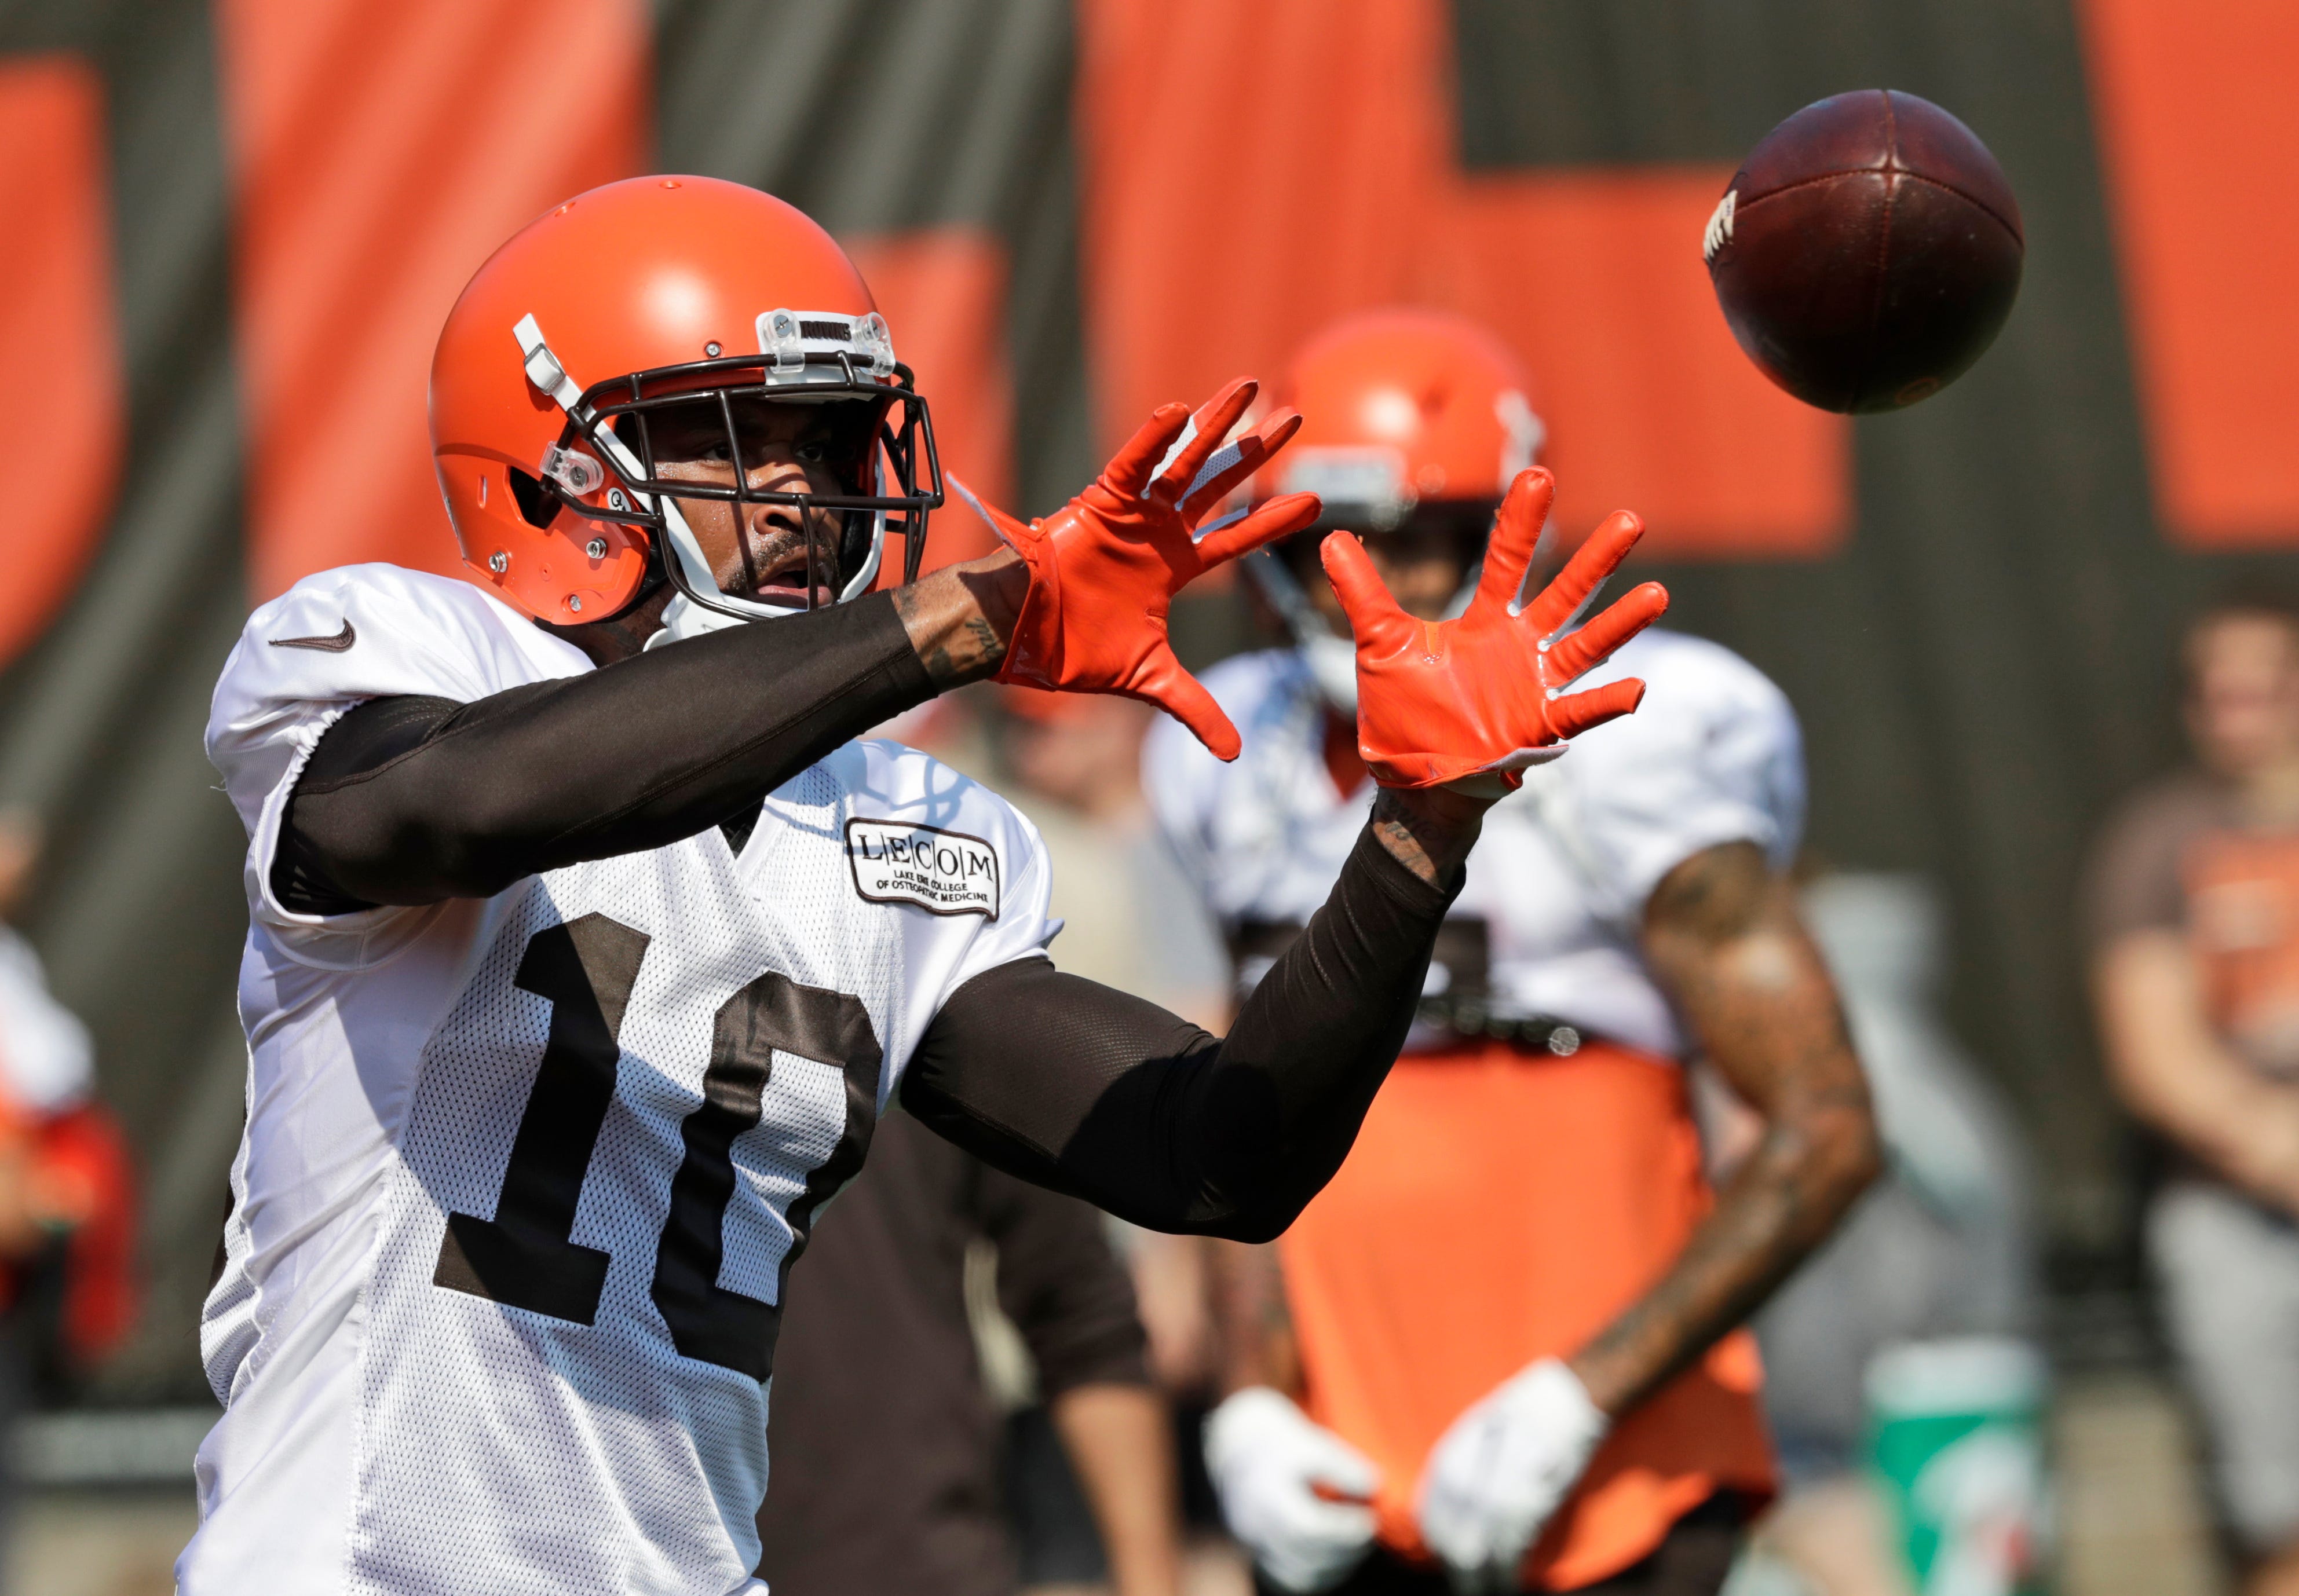 Browns waive WR Jaelen Strong, missed 2018 with knee injury